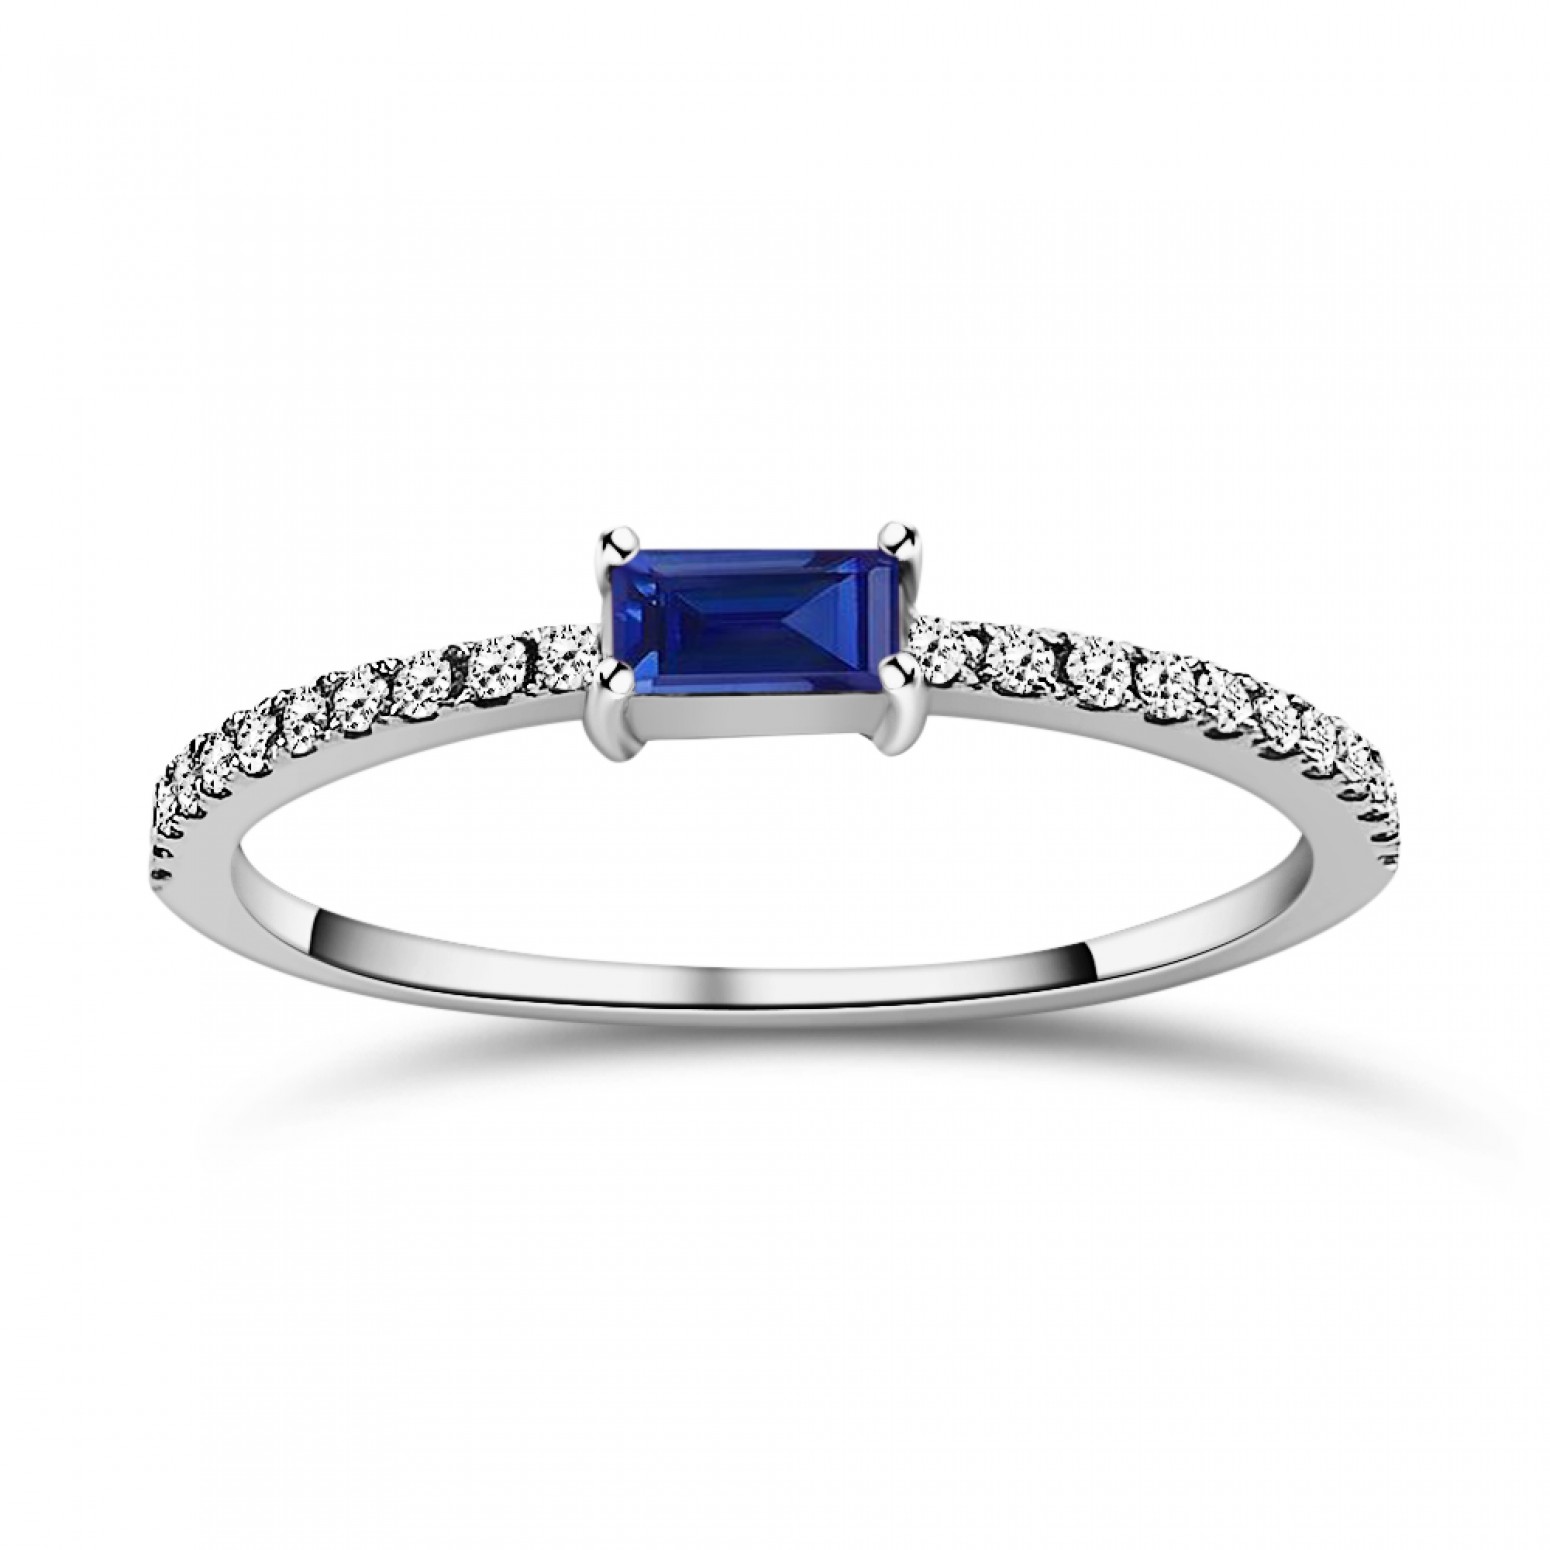 Solitaire ring 18K white gold with sapphire 0.14ct and diamonds 0.09ct, VS1, G, da4190 ENGAGEMENT RINGS Κοσμηματα - chrilia.gr